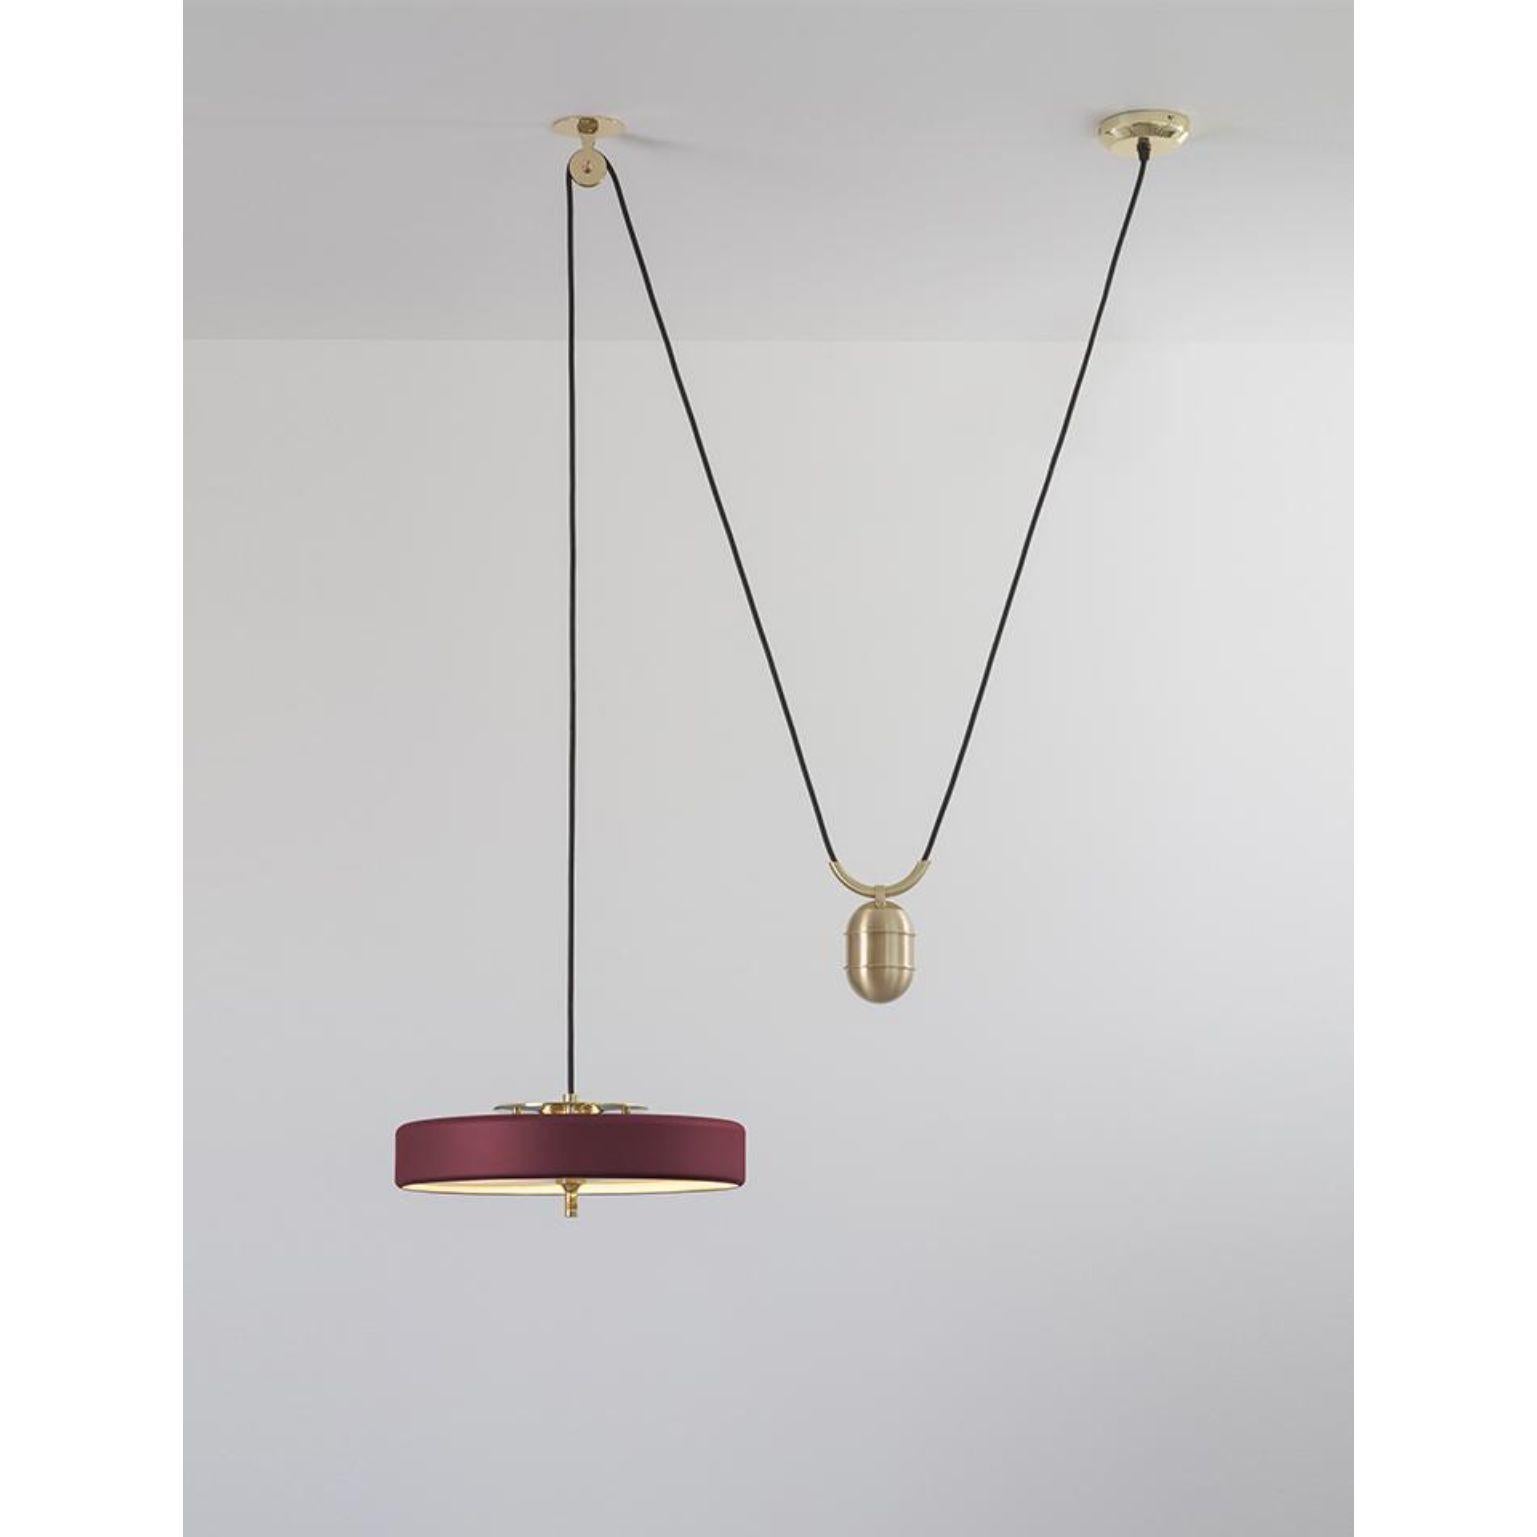 Revolve rise and fall pendant light - polished brass - Oxblood by Bert Frank
Dimensions: 30 x 35 x 11 cm, small lamp: 7.6 cm
Materials: Brass, steel

Also available in brushed brass
When Adam Yeats and Robbie Llewellyn founded Bert Frank in 2013 it